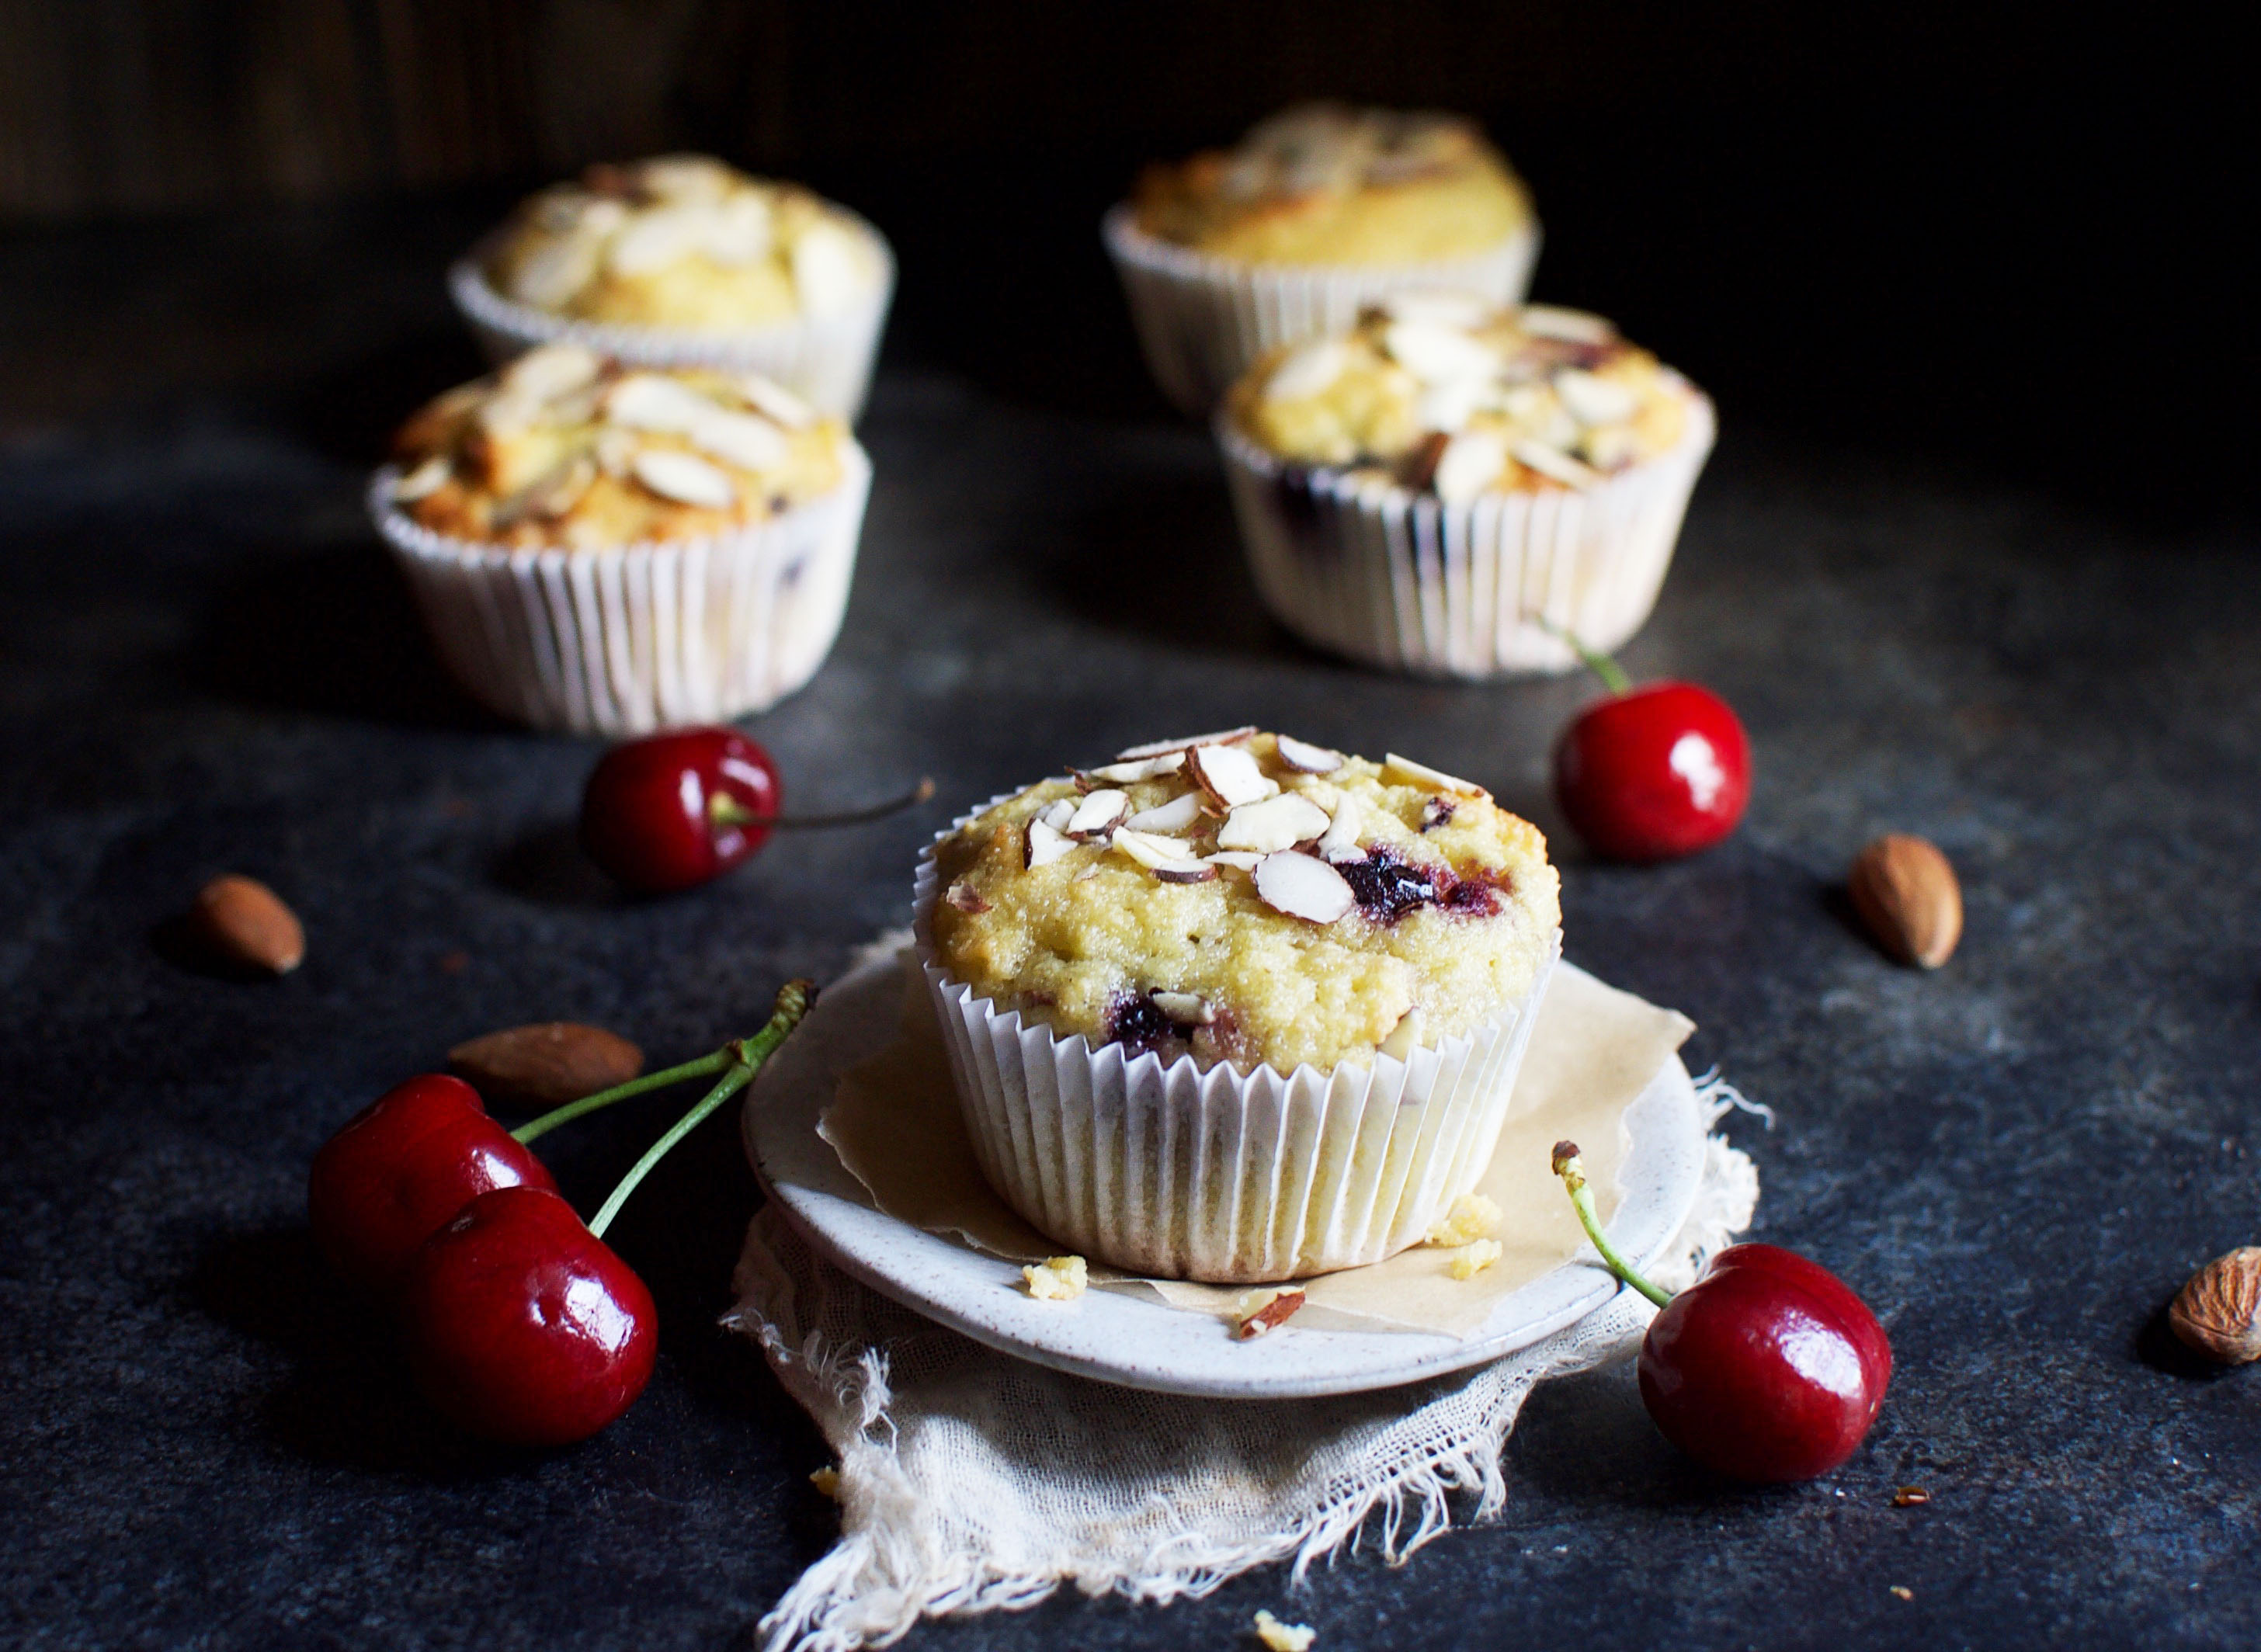 Low-Carb Almond Cherry Muffins